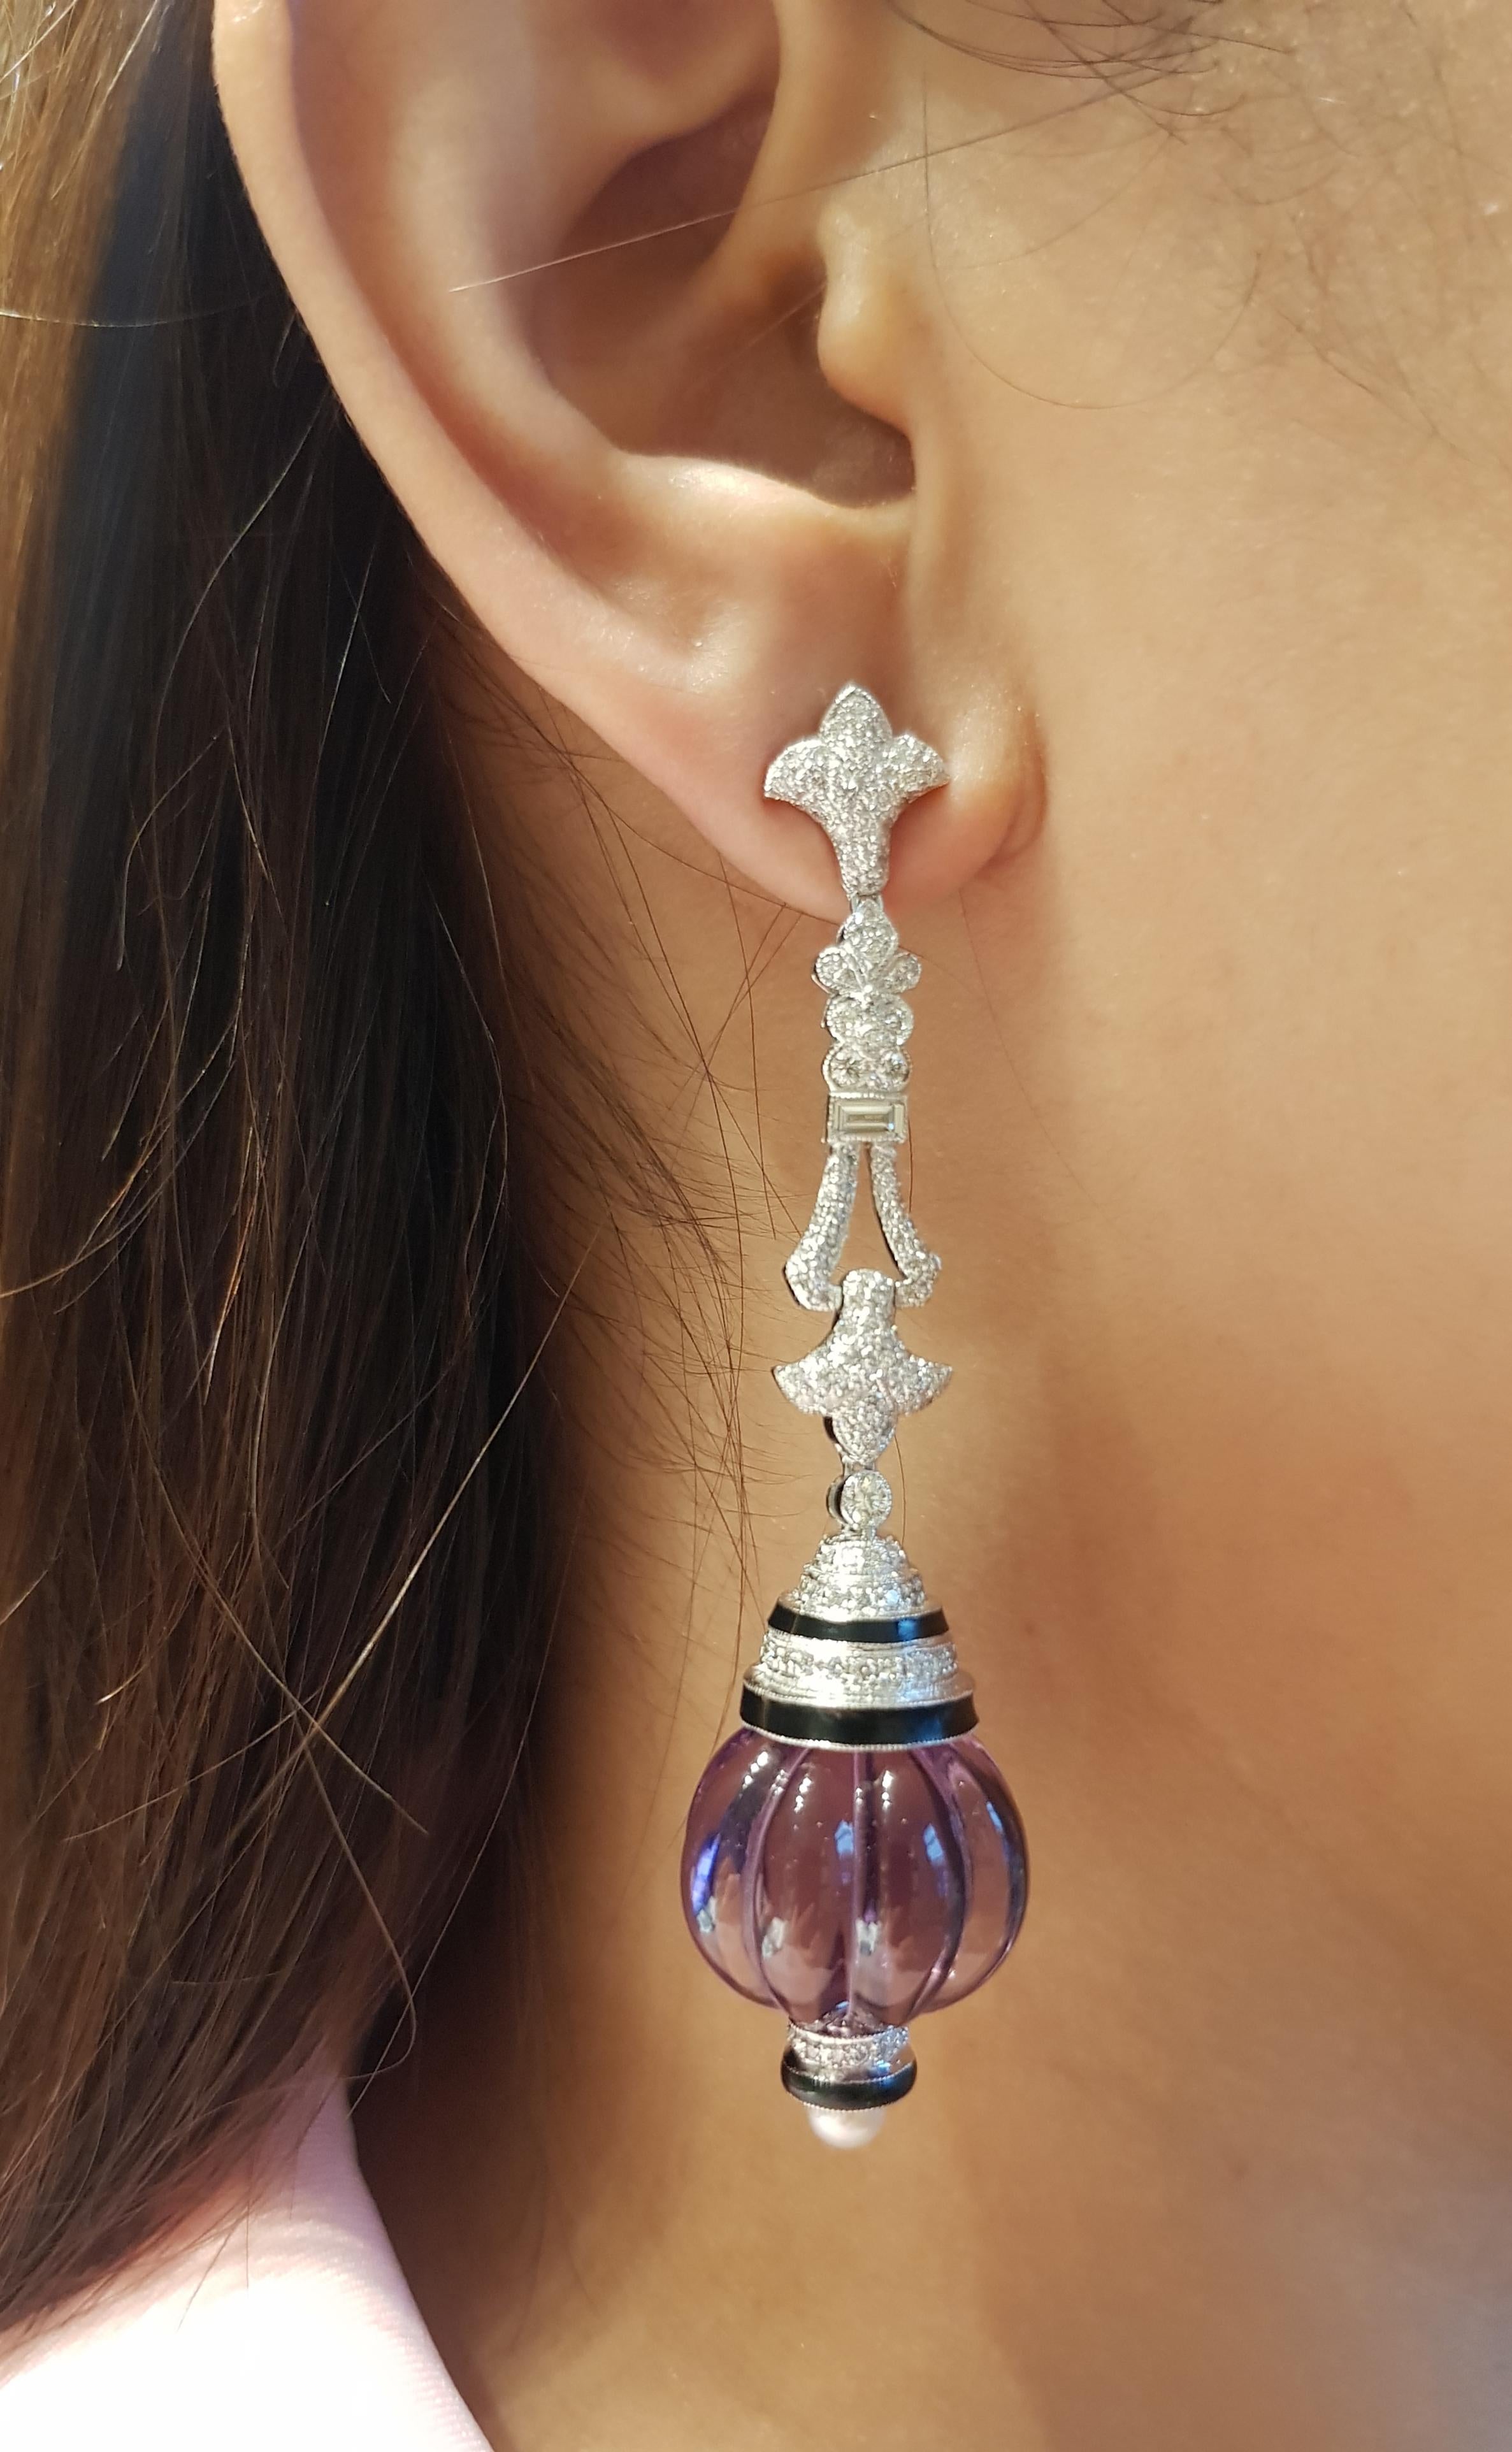 Amethyst 69.95 carats with Diamond 2.11 carats and Pearl Earrings set in 18 Karat White Gold Settings

Width:  1.7 cm 
Length: 7.4 cm
Total Weight: 33.17 grams

